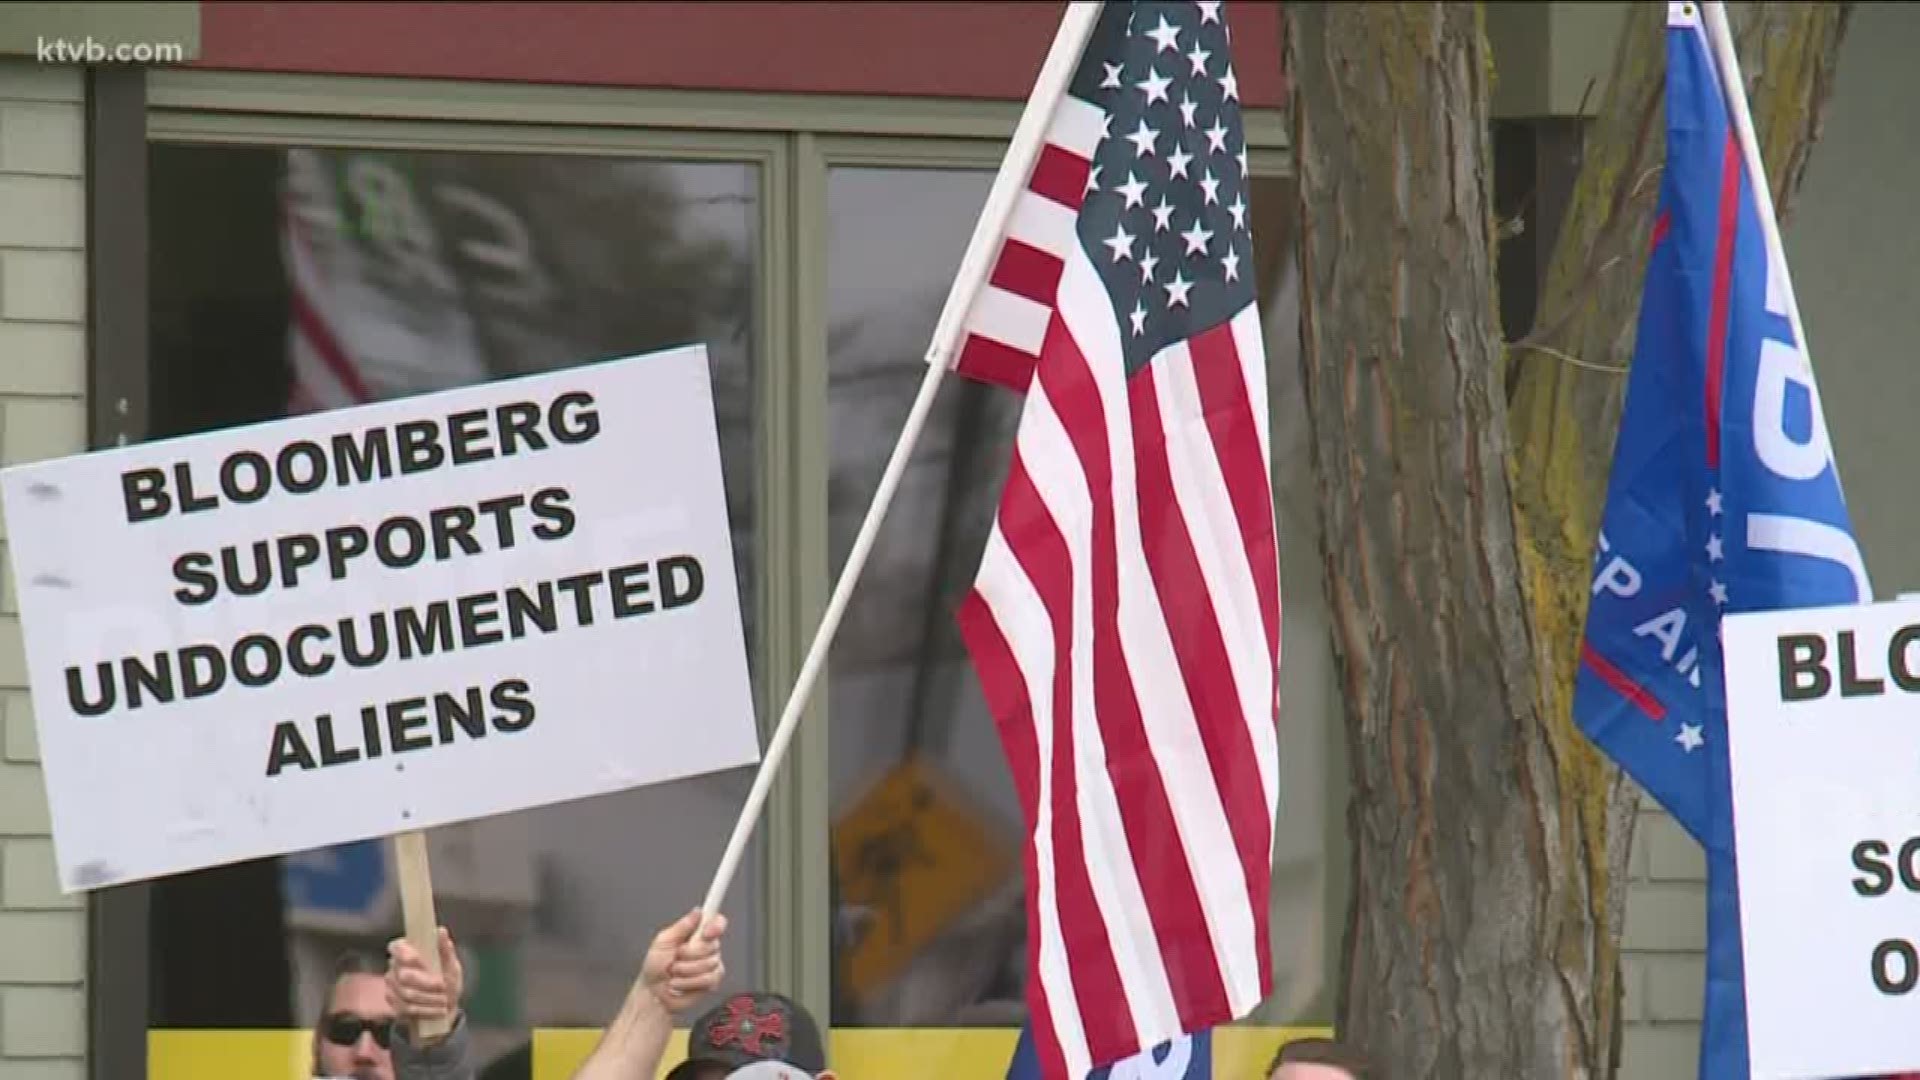 Boise's second amendment group stood outside Democrat presidential candidate Micheal Bloomberg's campaign office fully armed with guns and signs.